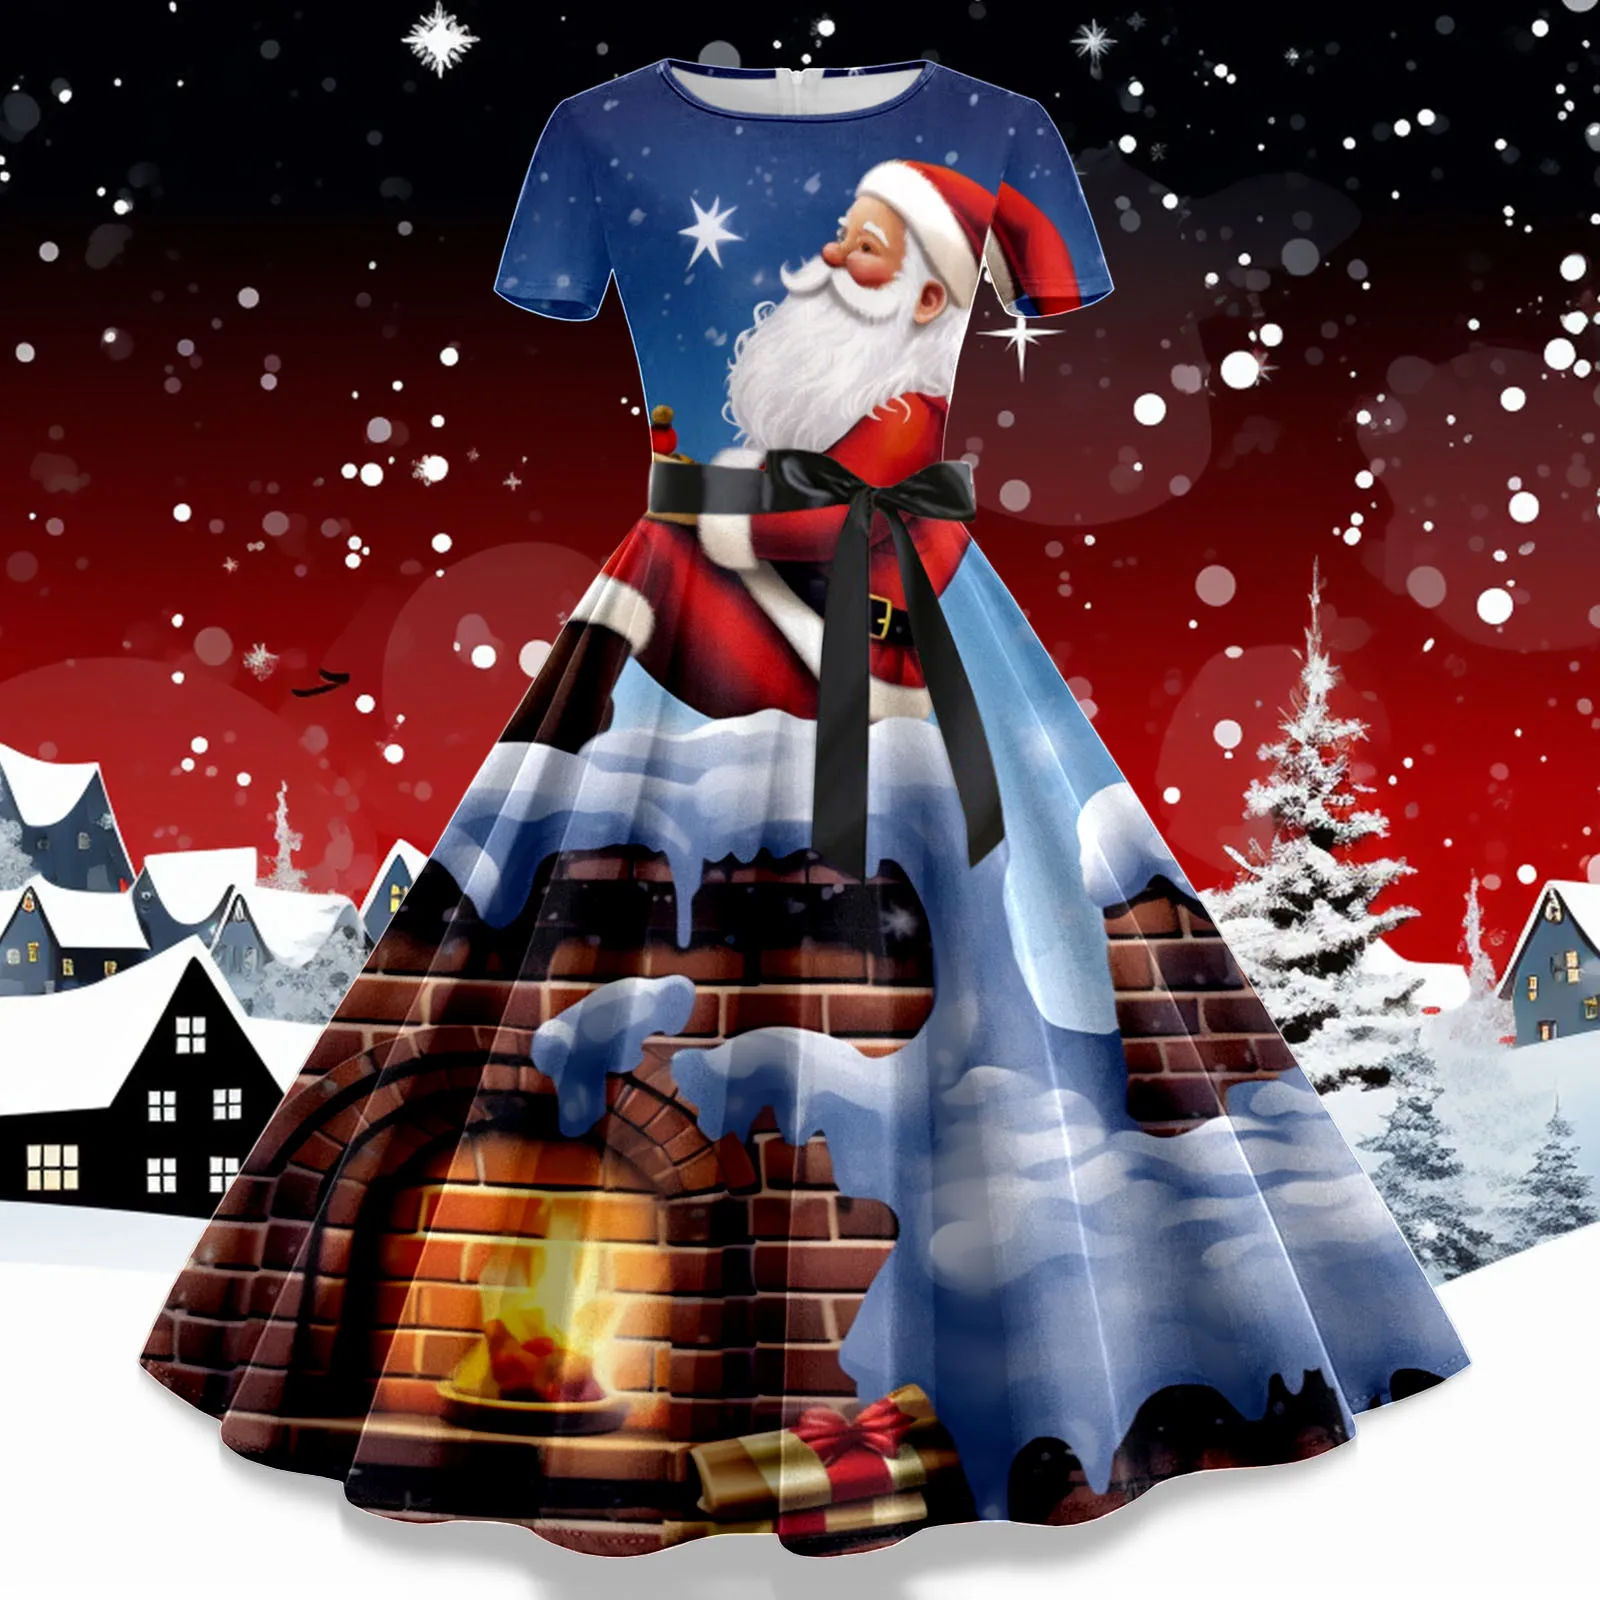 

Robe Christmas Dresses for Women Winter Pinup Rockabilly Sexy Cosplay Party Dress Santa Claus Snow Print Cocktail Prom Dress